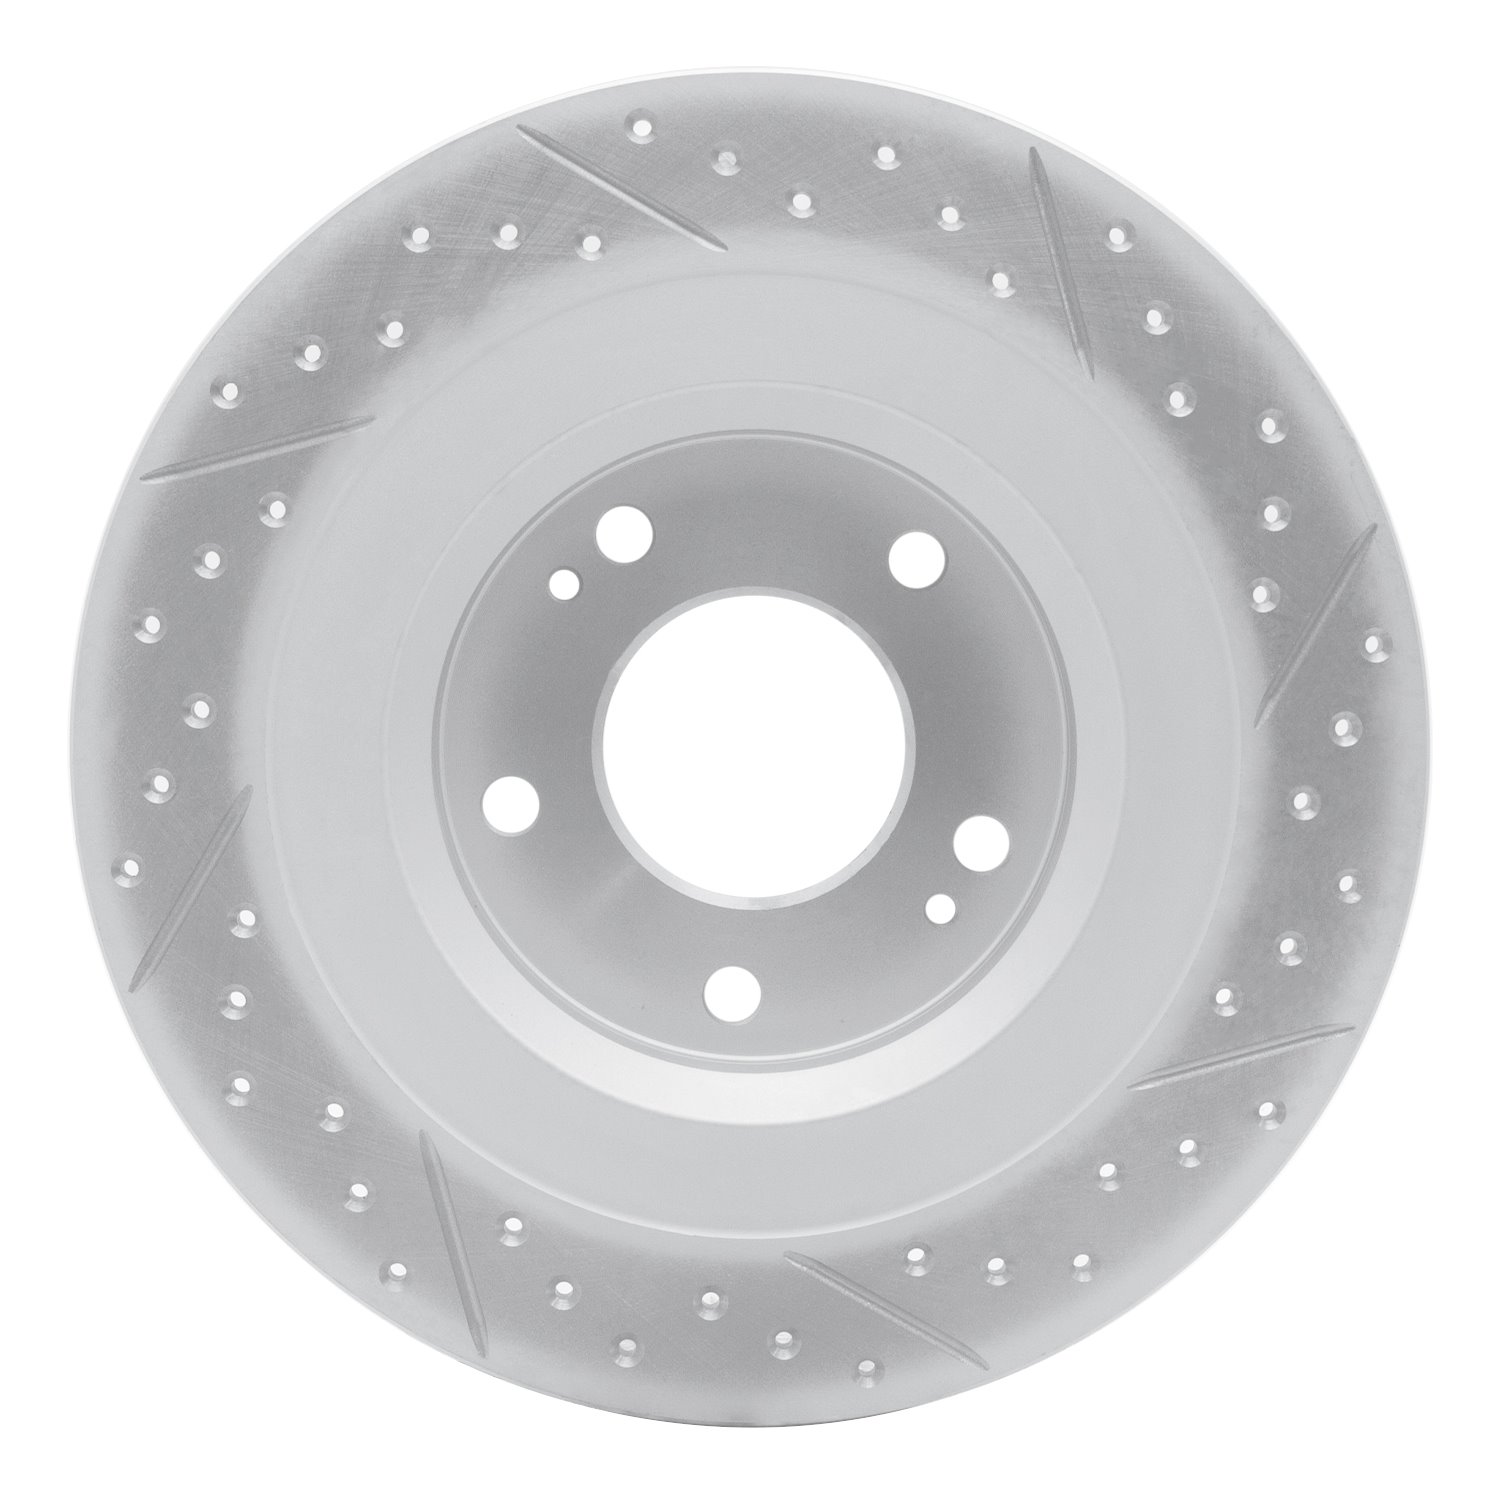 830-72063L Geoperformance Drilled/Slotted Brake Rotor, Fits Select Mitsubishi, Position: Rear Left